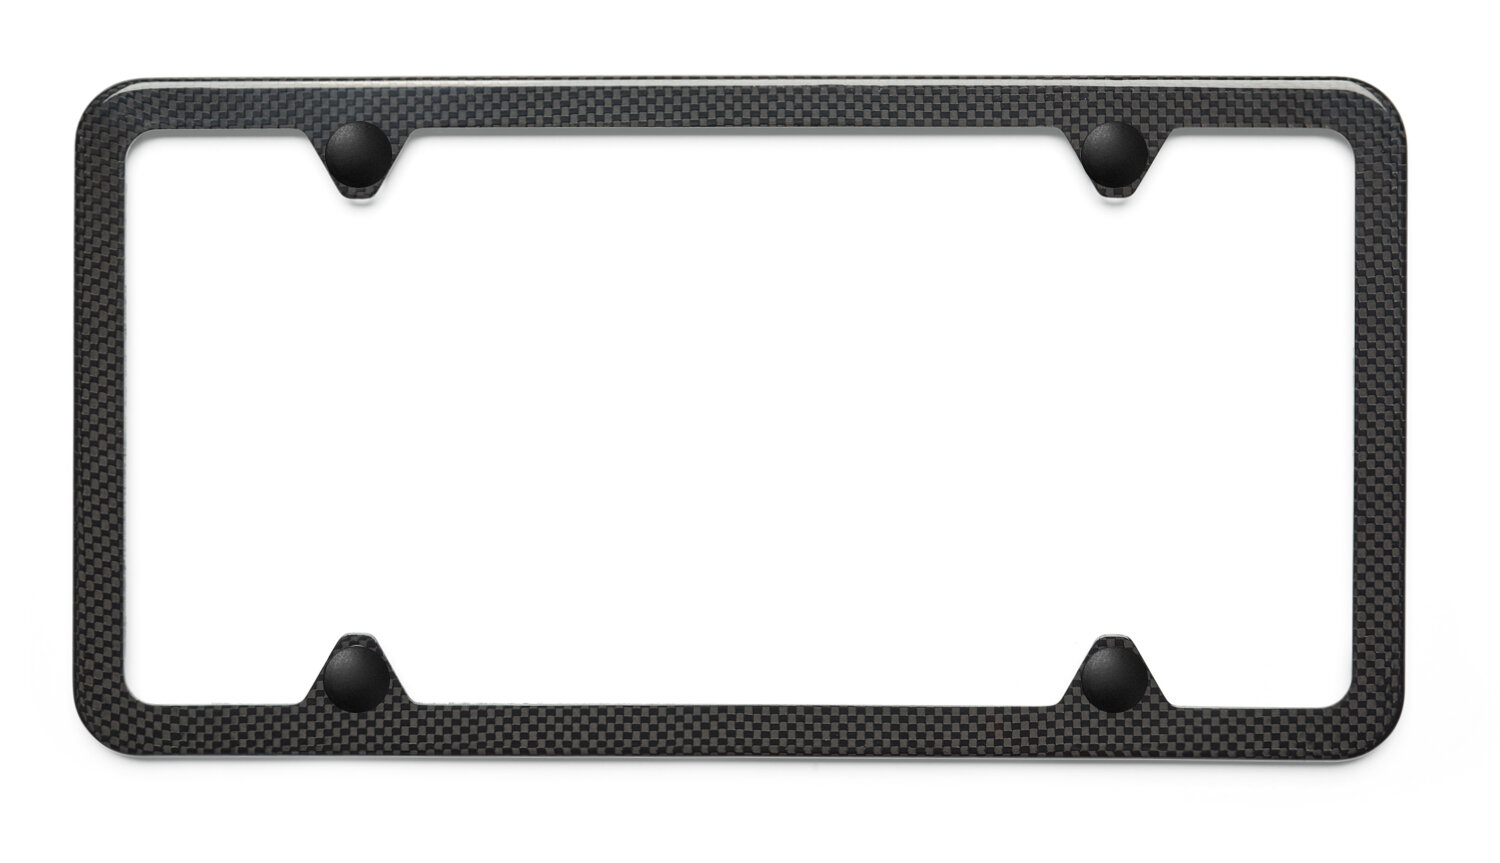 1PCS 100% Real Carbon Fiber License Plate Frame 2 Holes Black Licenses Plates Frames,Car Licence Plate Covers Holders Slim Design with Chrome Screw Caps Tool Kit for US Canda and Mexico Vehicles 